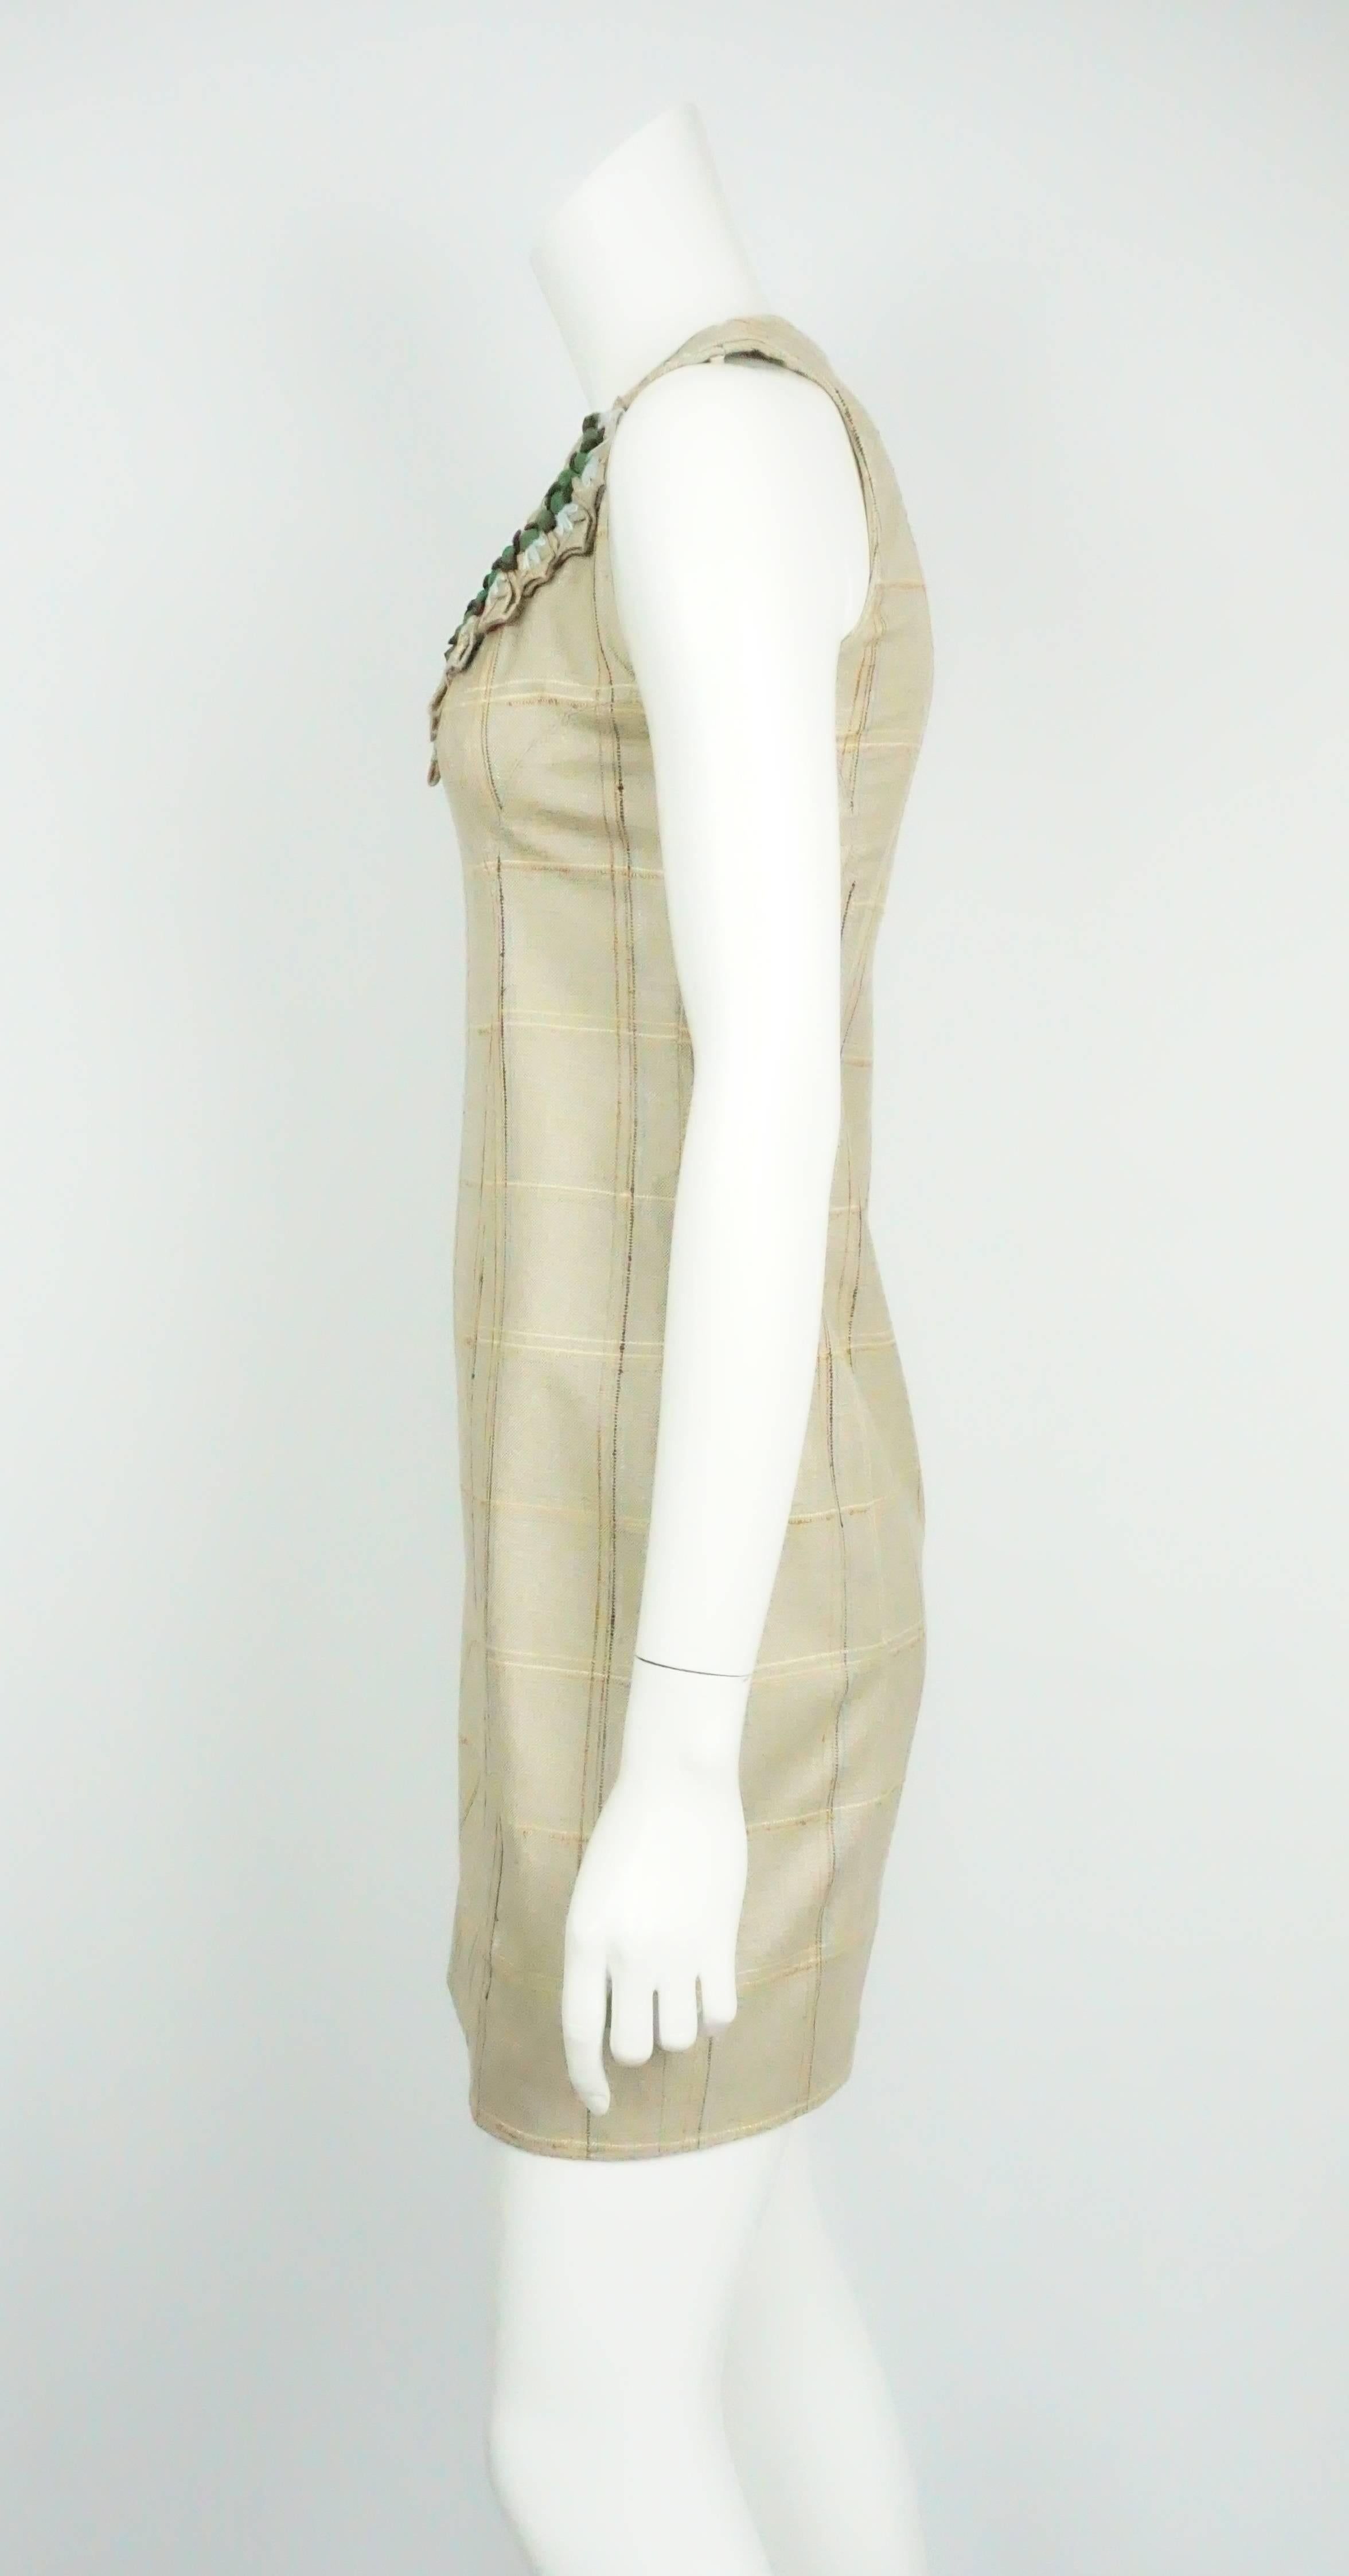 Carolina Herrera Tan Plaid Dress w/ Stone Detail - 2 This classic sheath dress is completely made of silk. It is sleeveless and hits right above the knee. It has a plaid pattern throughout with a beautiful scoop neck detailing that includes a braid